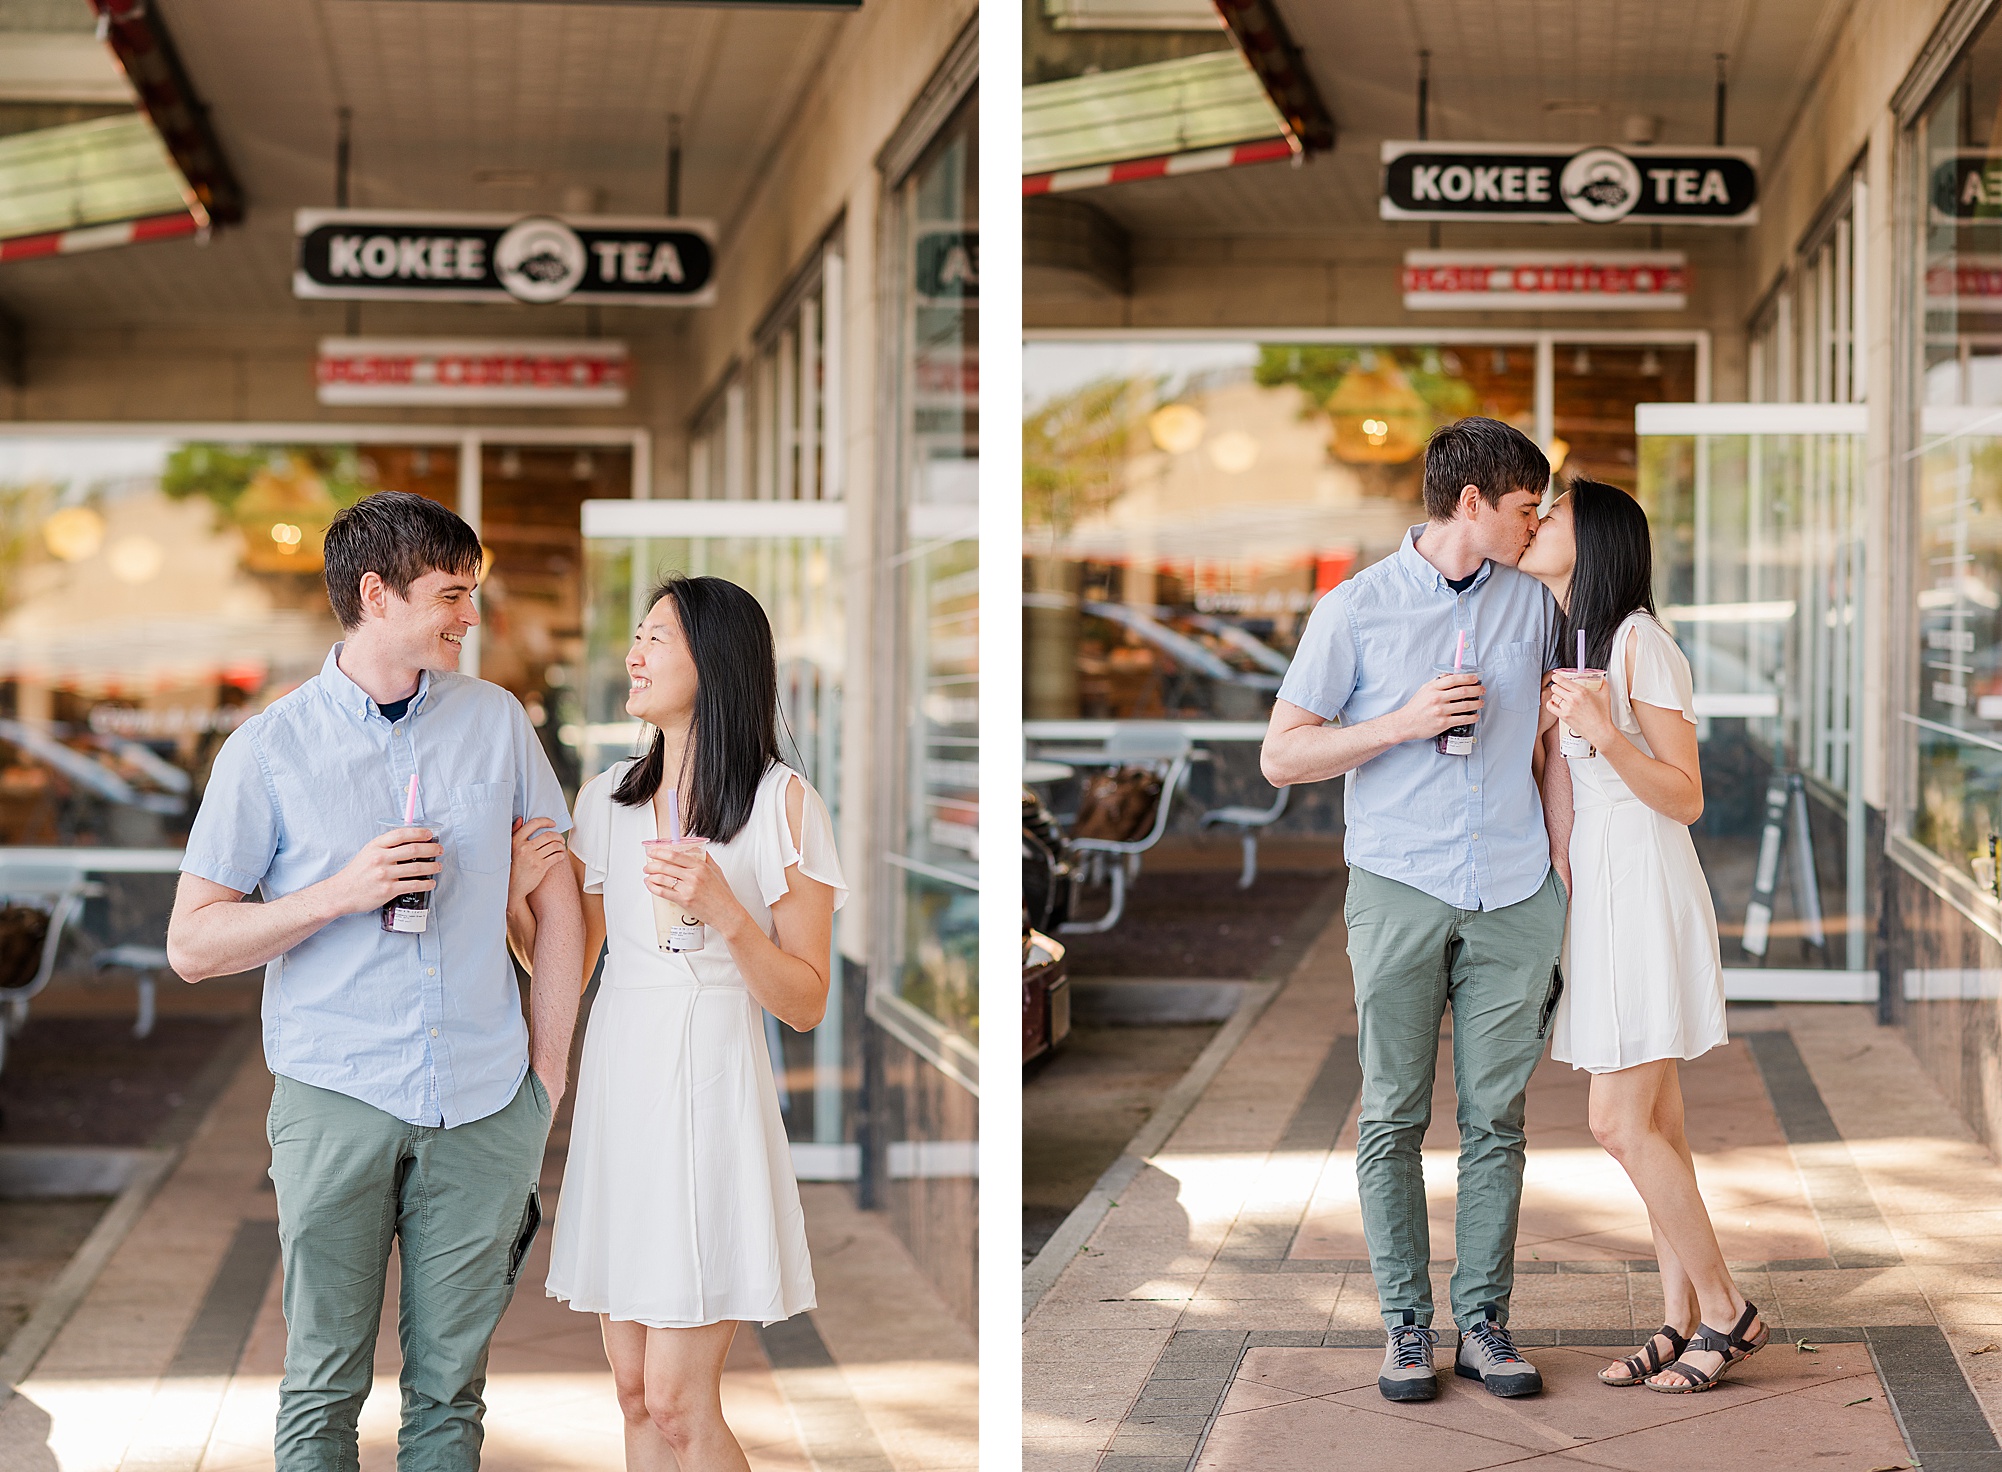 Fun Richmond Engagement Session at Kokee Tea in Carytow